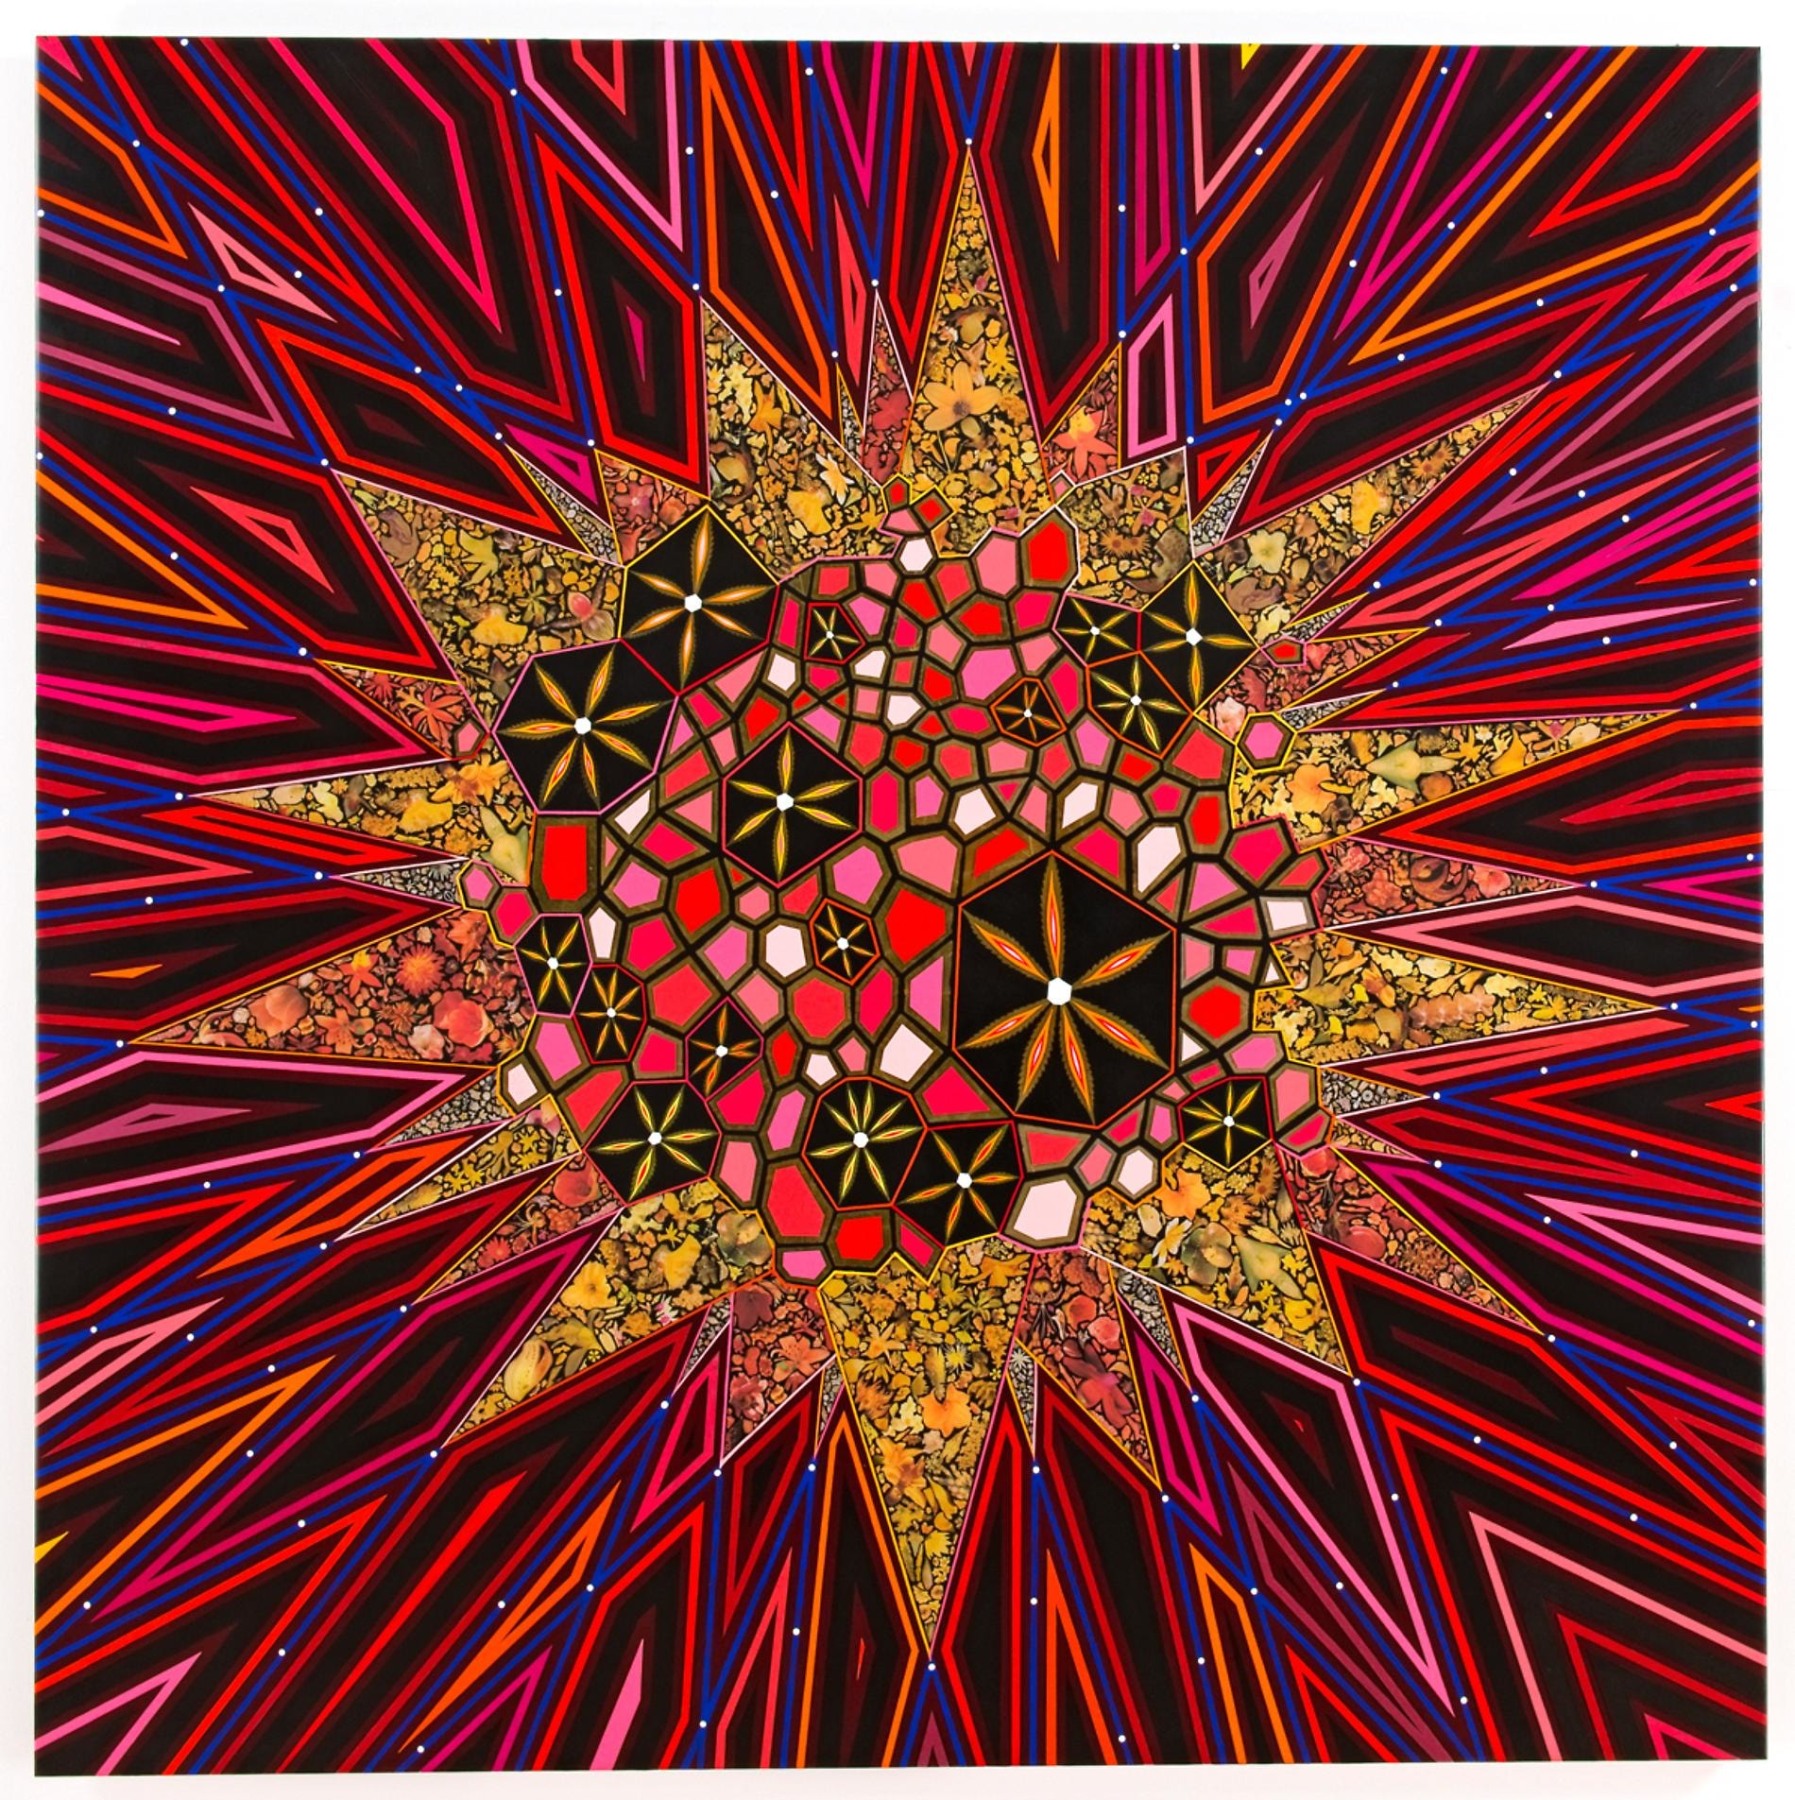 Image of FRED TOMASELLI's Black Star,&nbsp;2013